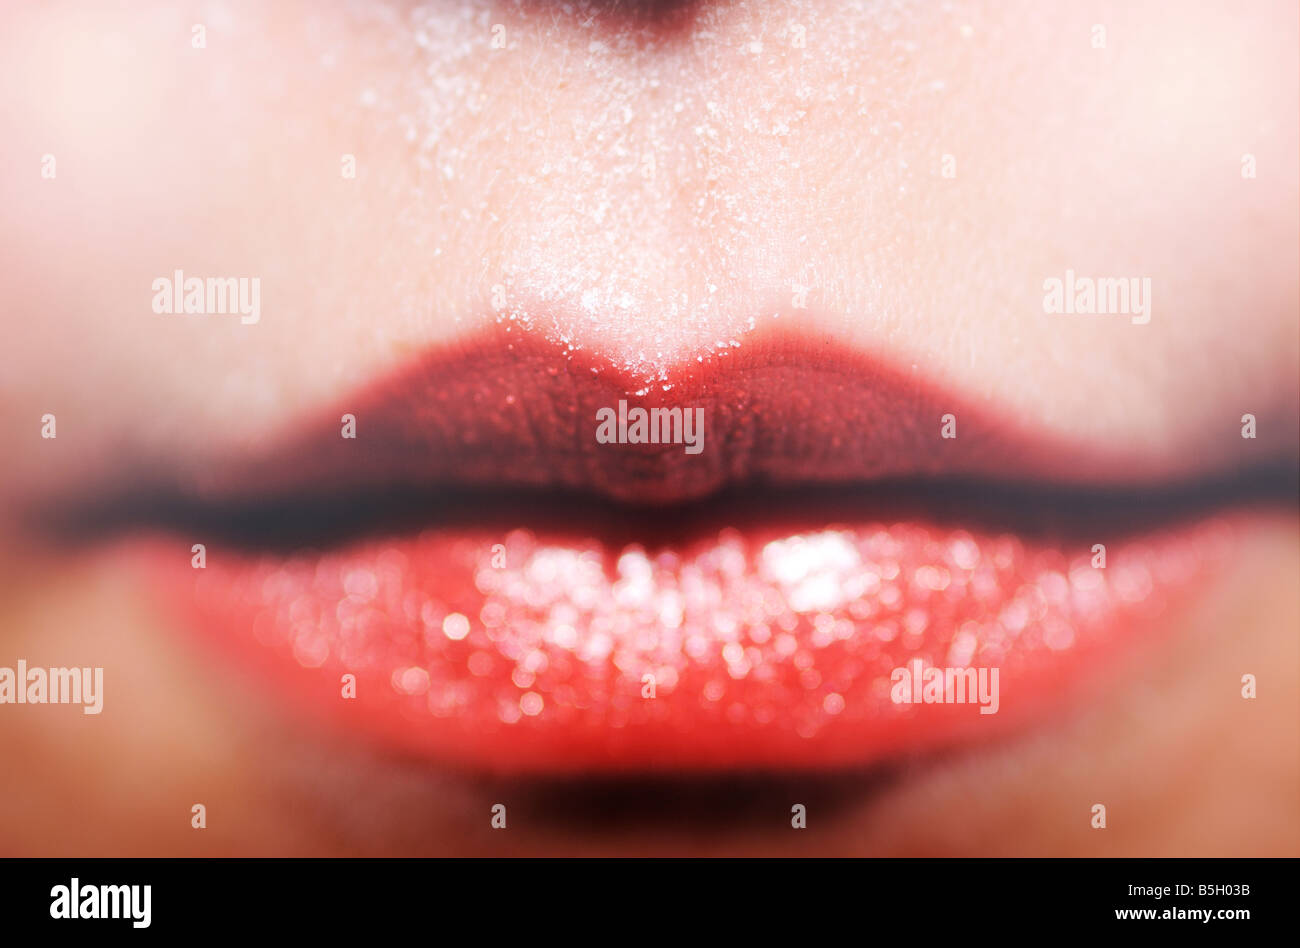 symbol for cocaine consumption/abuse, red lips and white powder Stock Photo